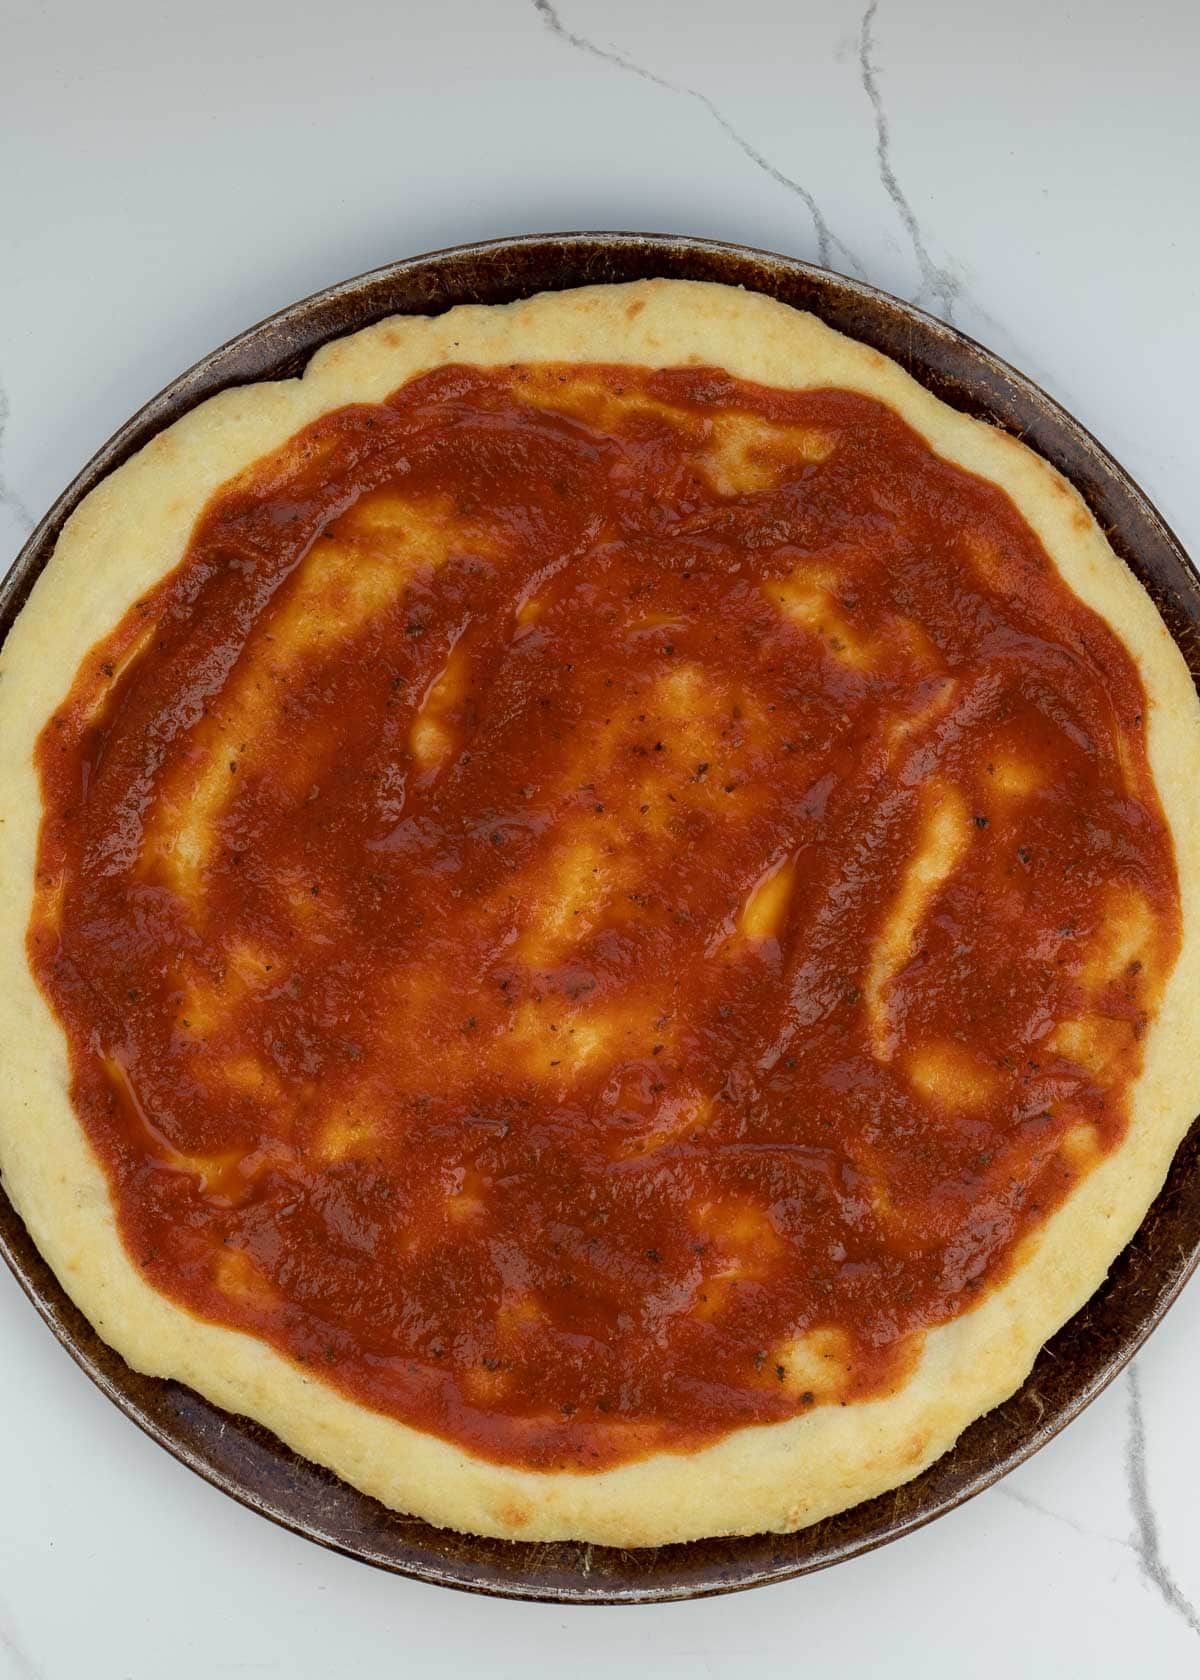 This step-by-step guide will show you exactly how to make the best Keto Pizza Recipe! This low carb pizza crust is crispy and delicious! Enjoy a slice of this keto pizza for about 3 net carbs!